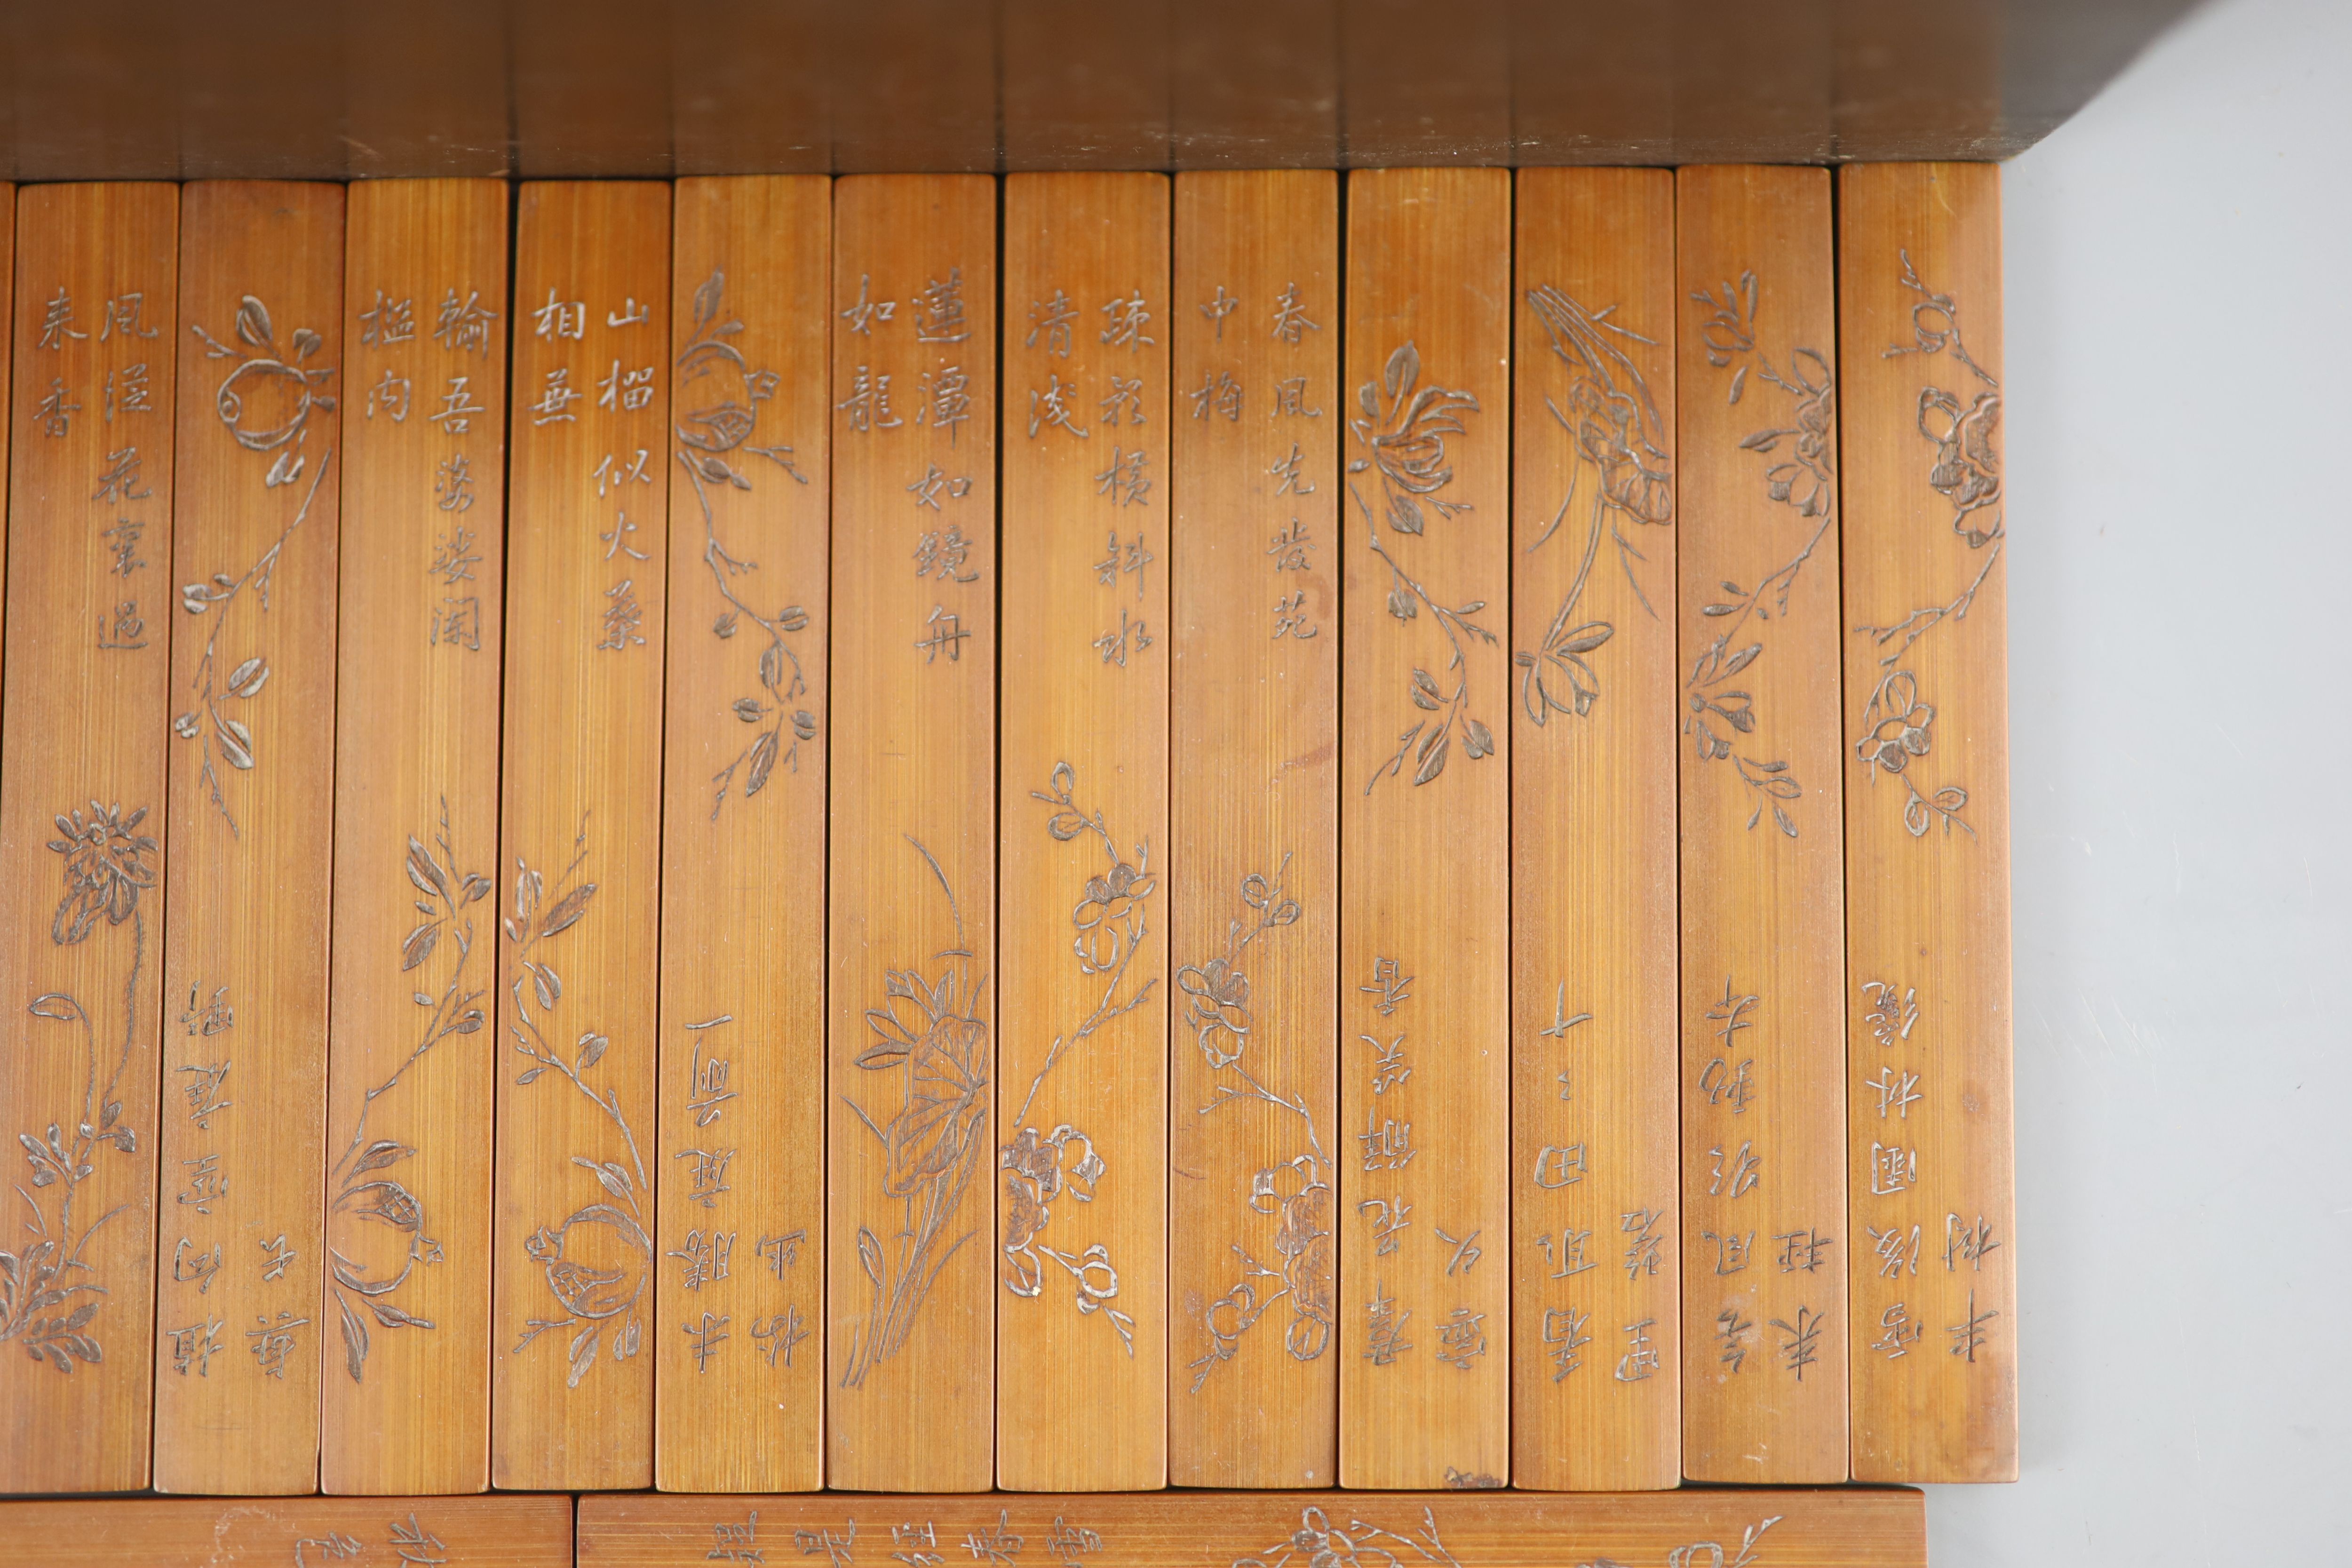 A set of sixty Chinese inscribed bamboo games counters or tallies, late Qing dynasty,